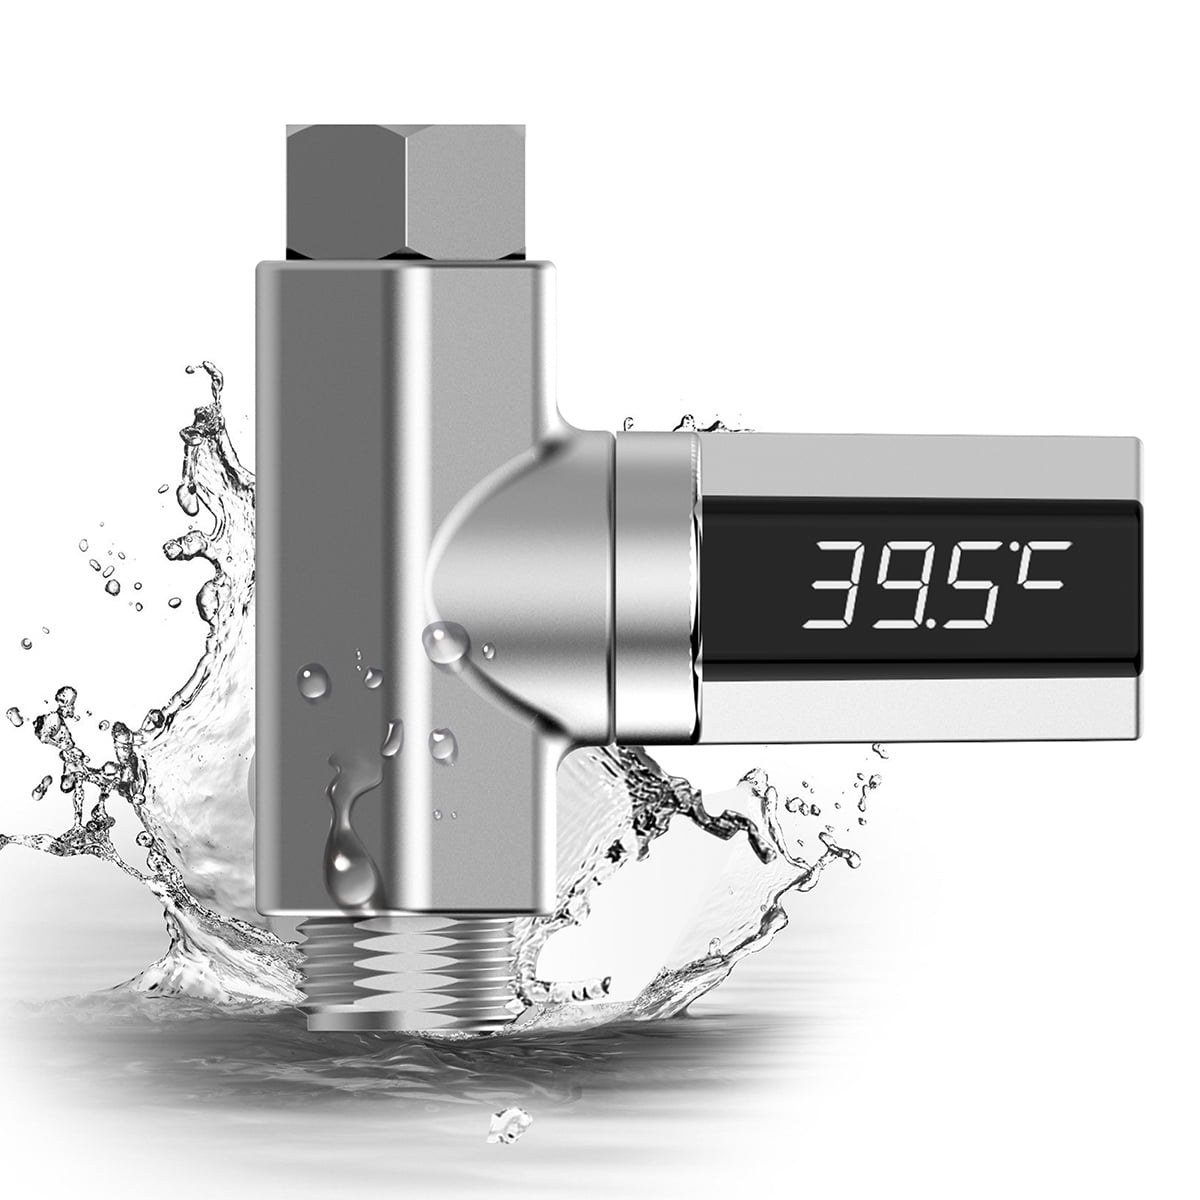 Water Temperature Monitor LED Display Water Flow Shower Portable H9K0 